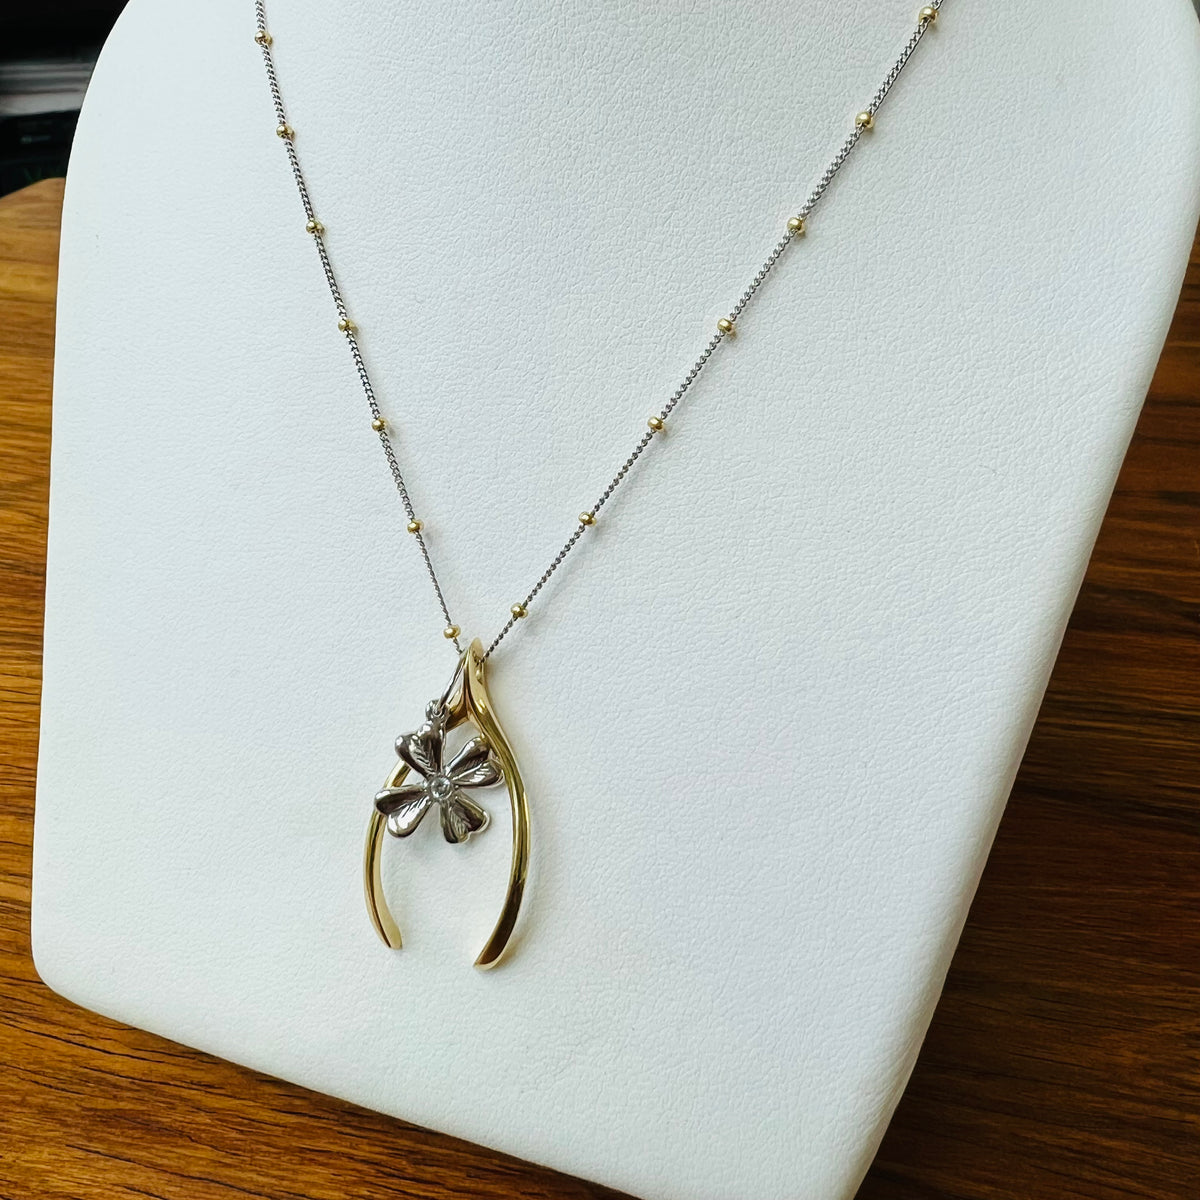 MAKE-A-WISH NECKLACE